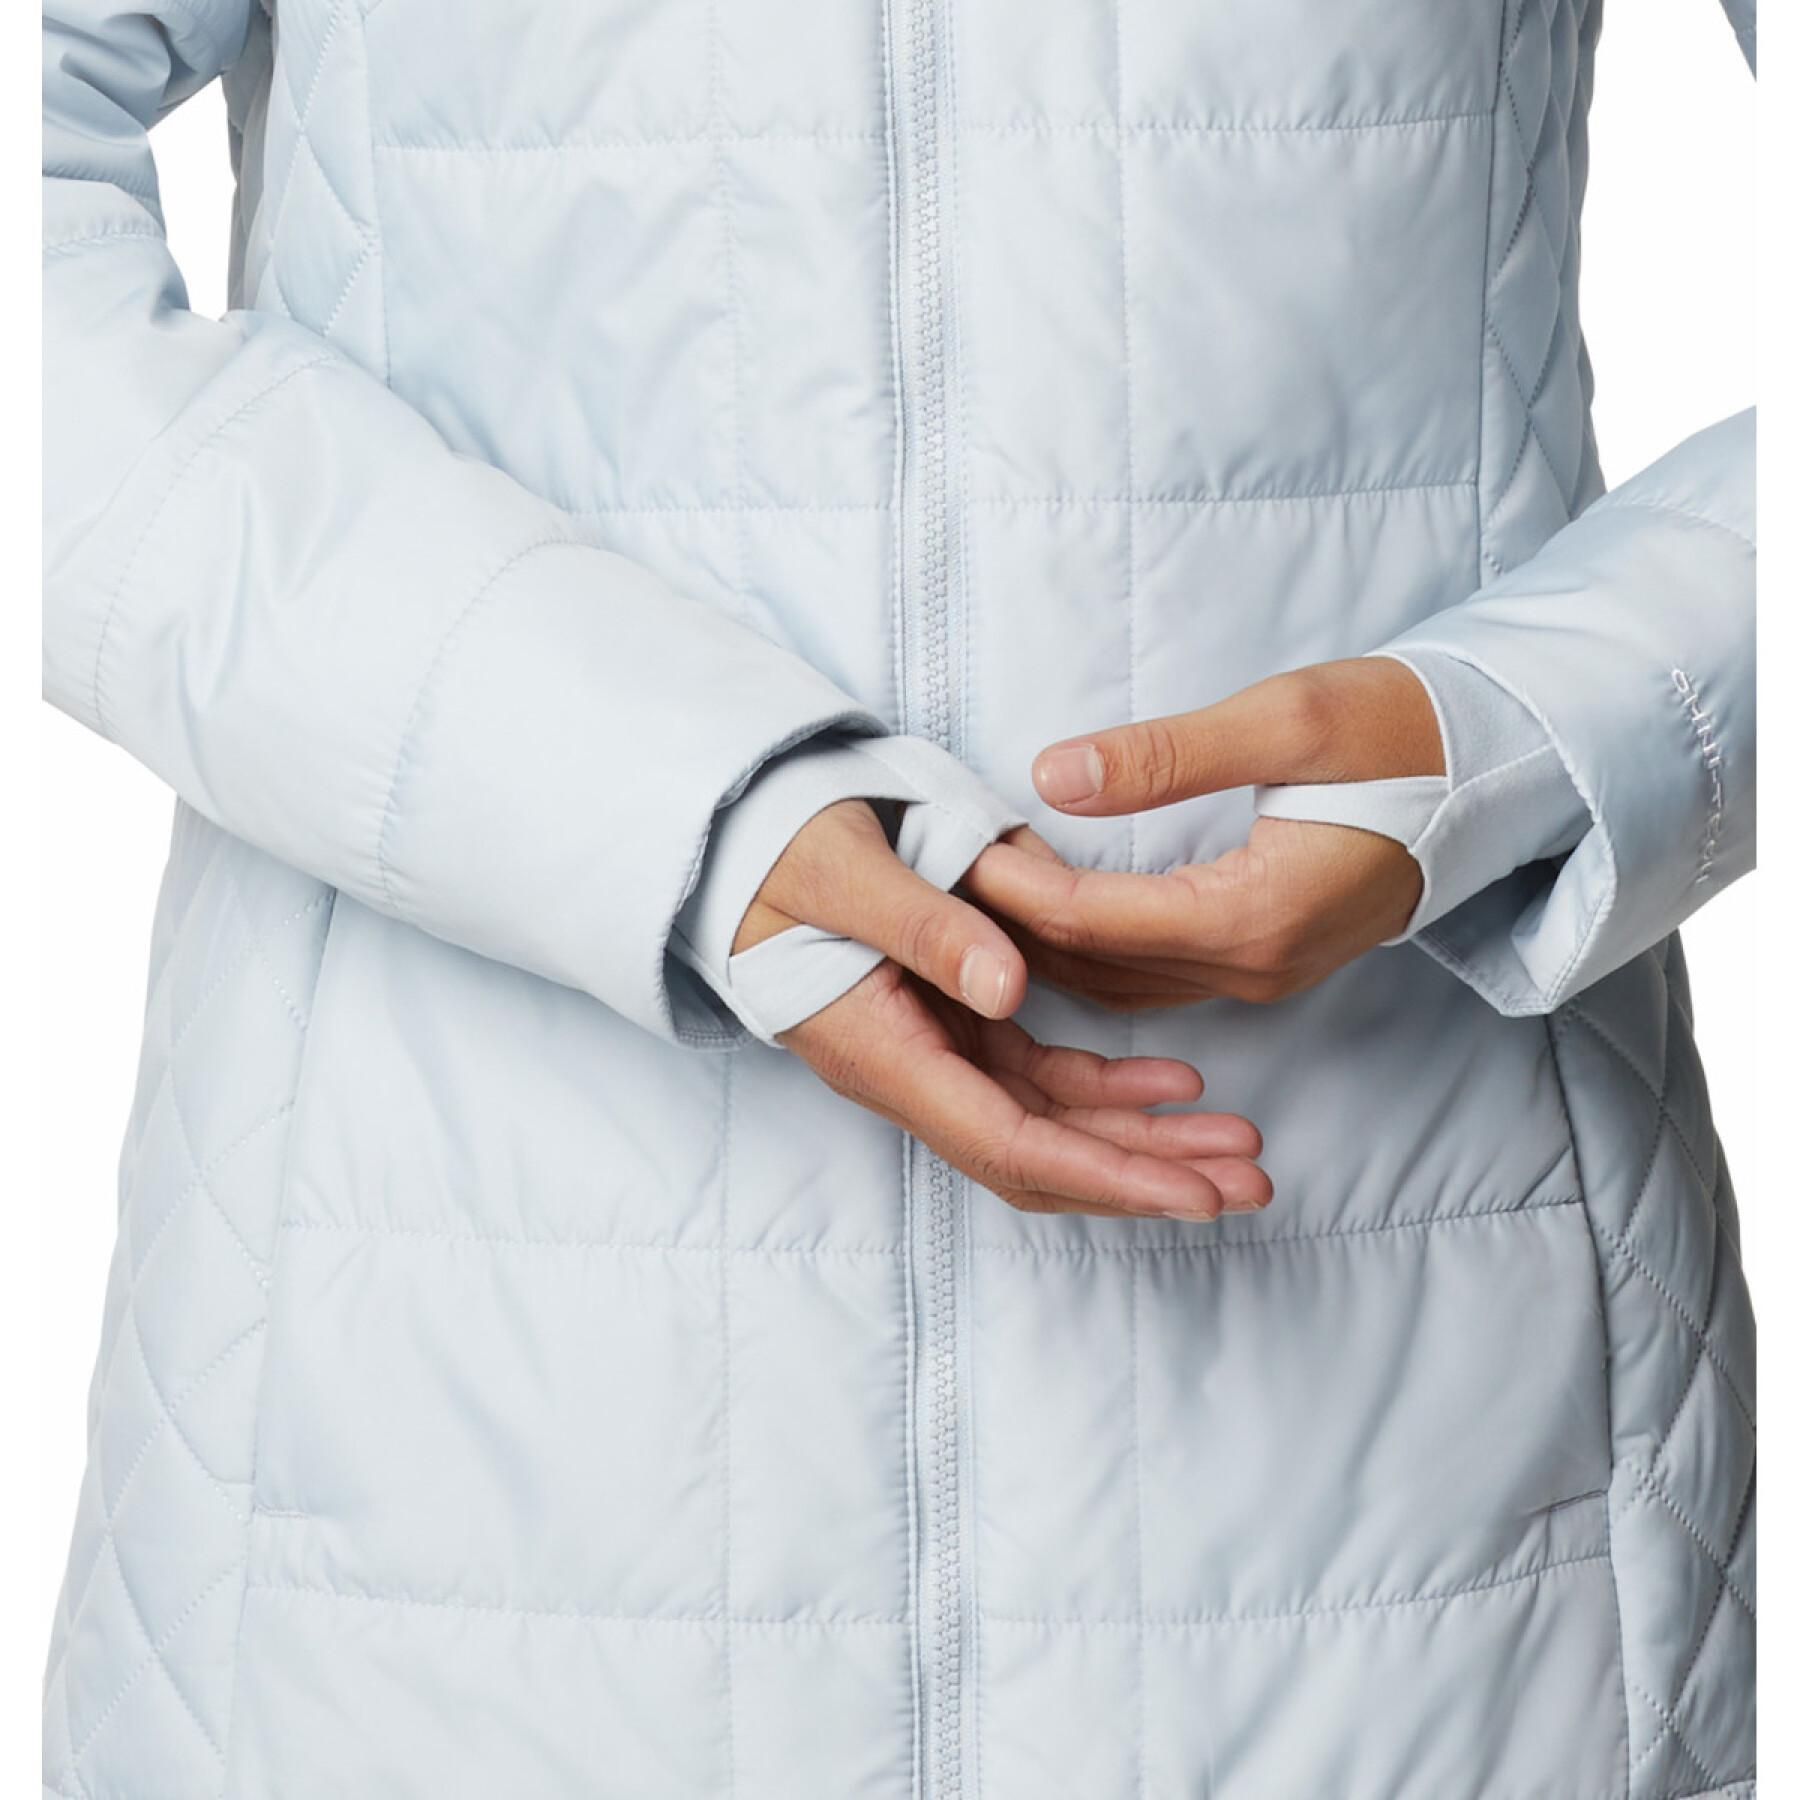 Chaqueta impermeable mujer Columbia Carson Pass IC